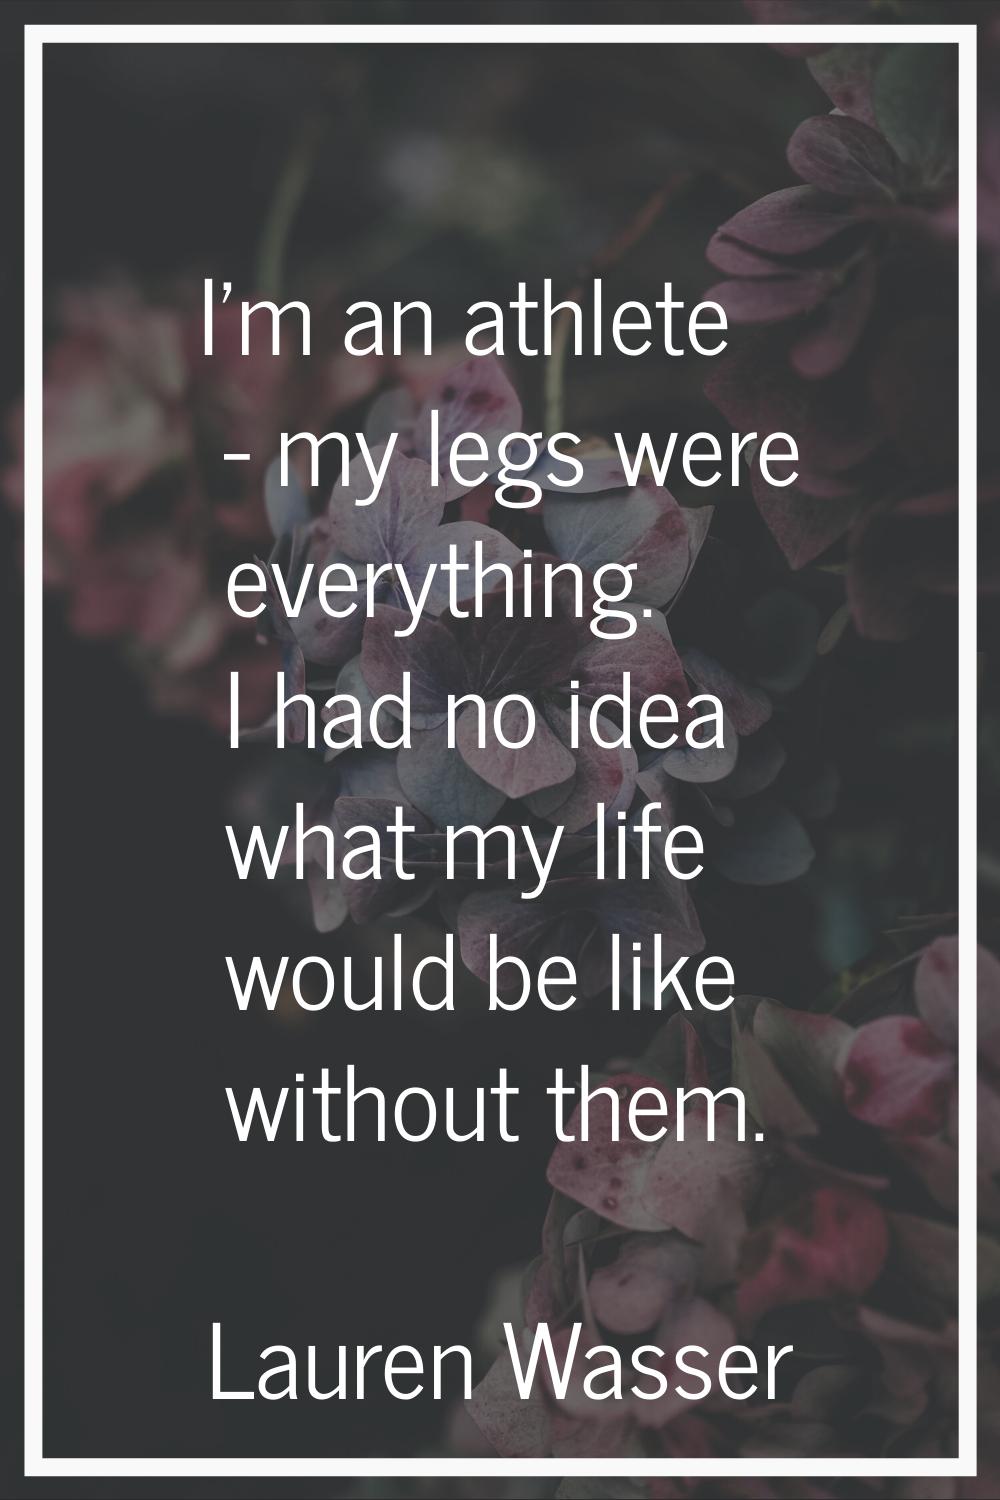 I'm an athlete - my legs were everything. I had no idea what my life would be like without them.